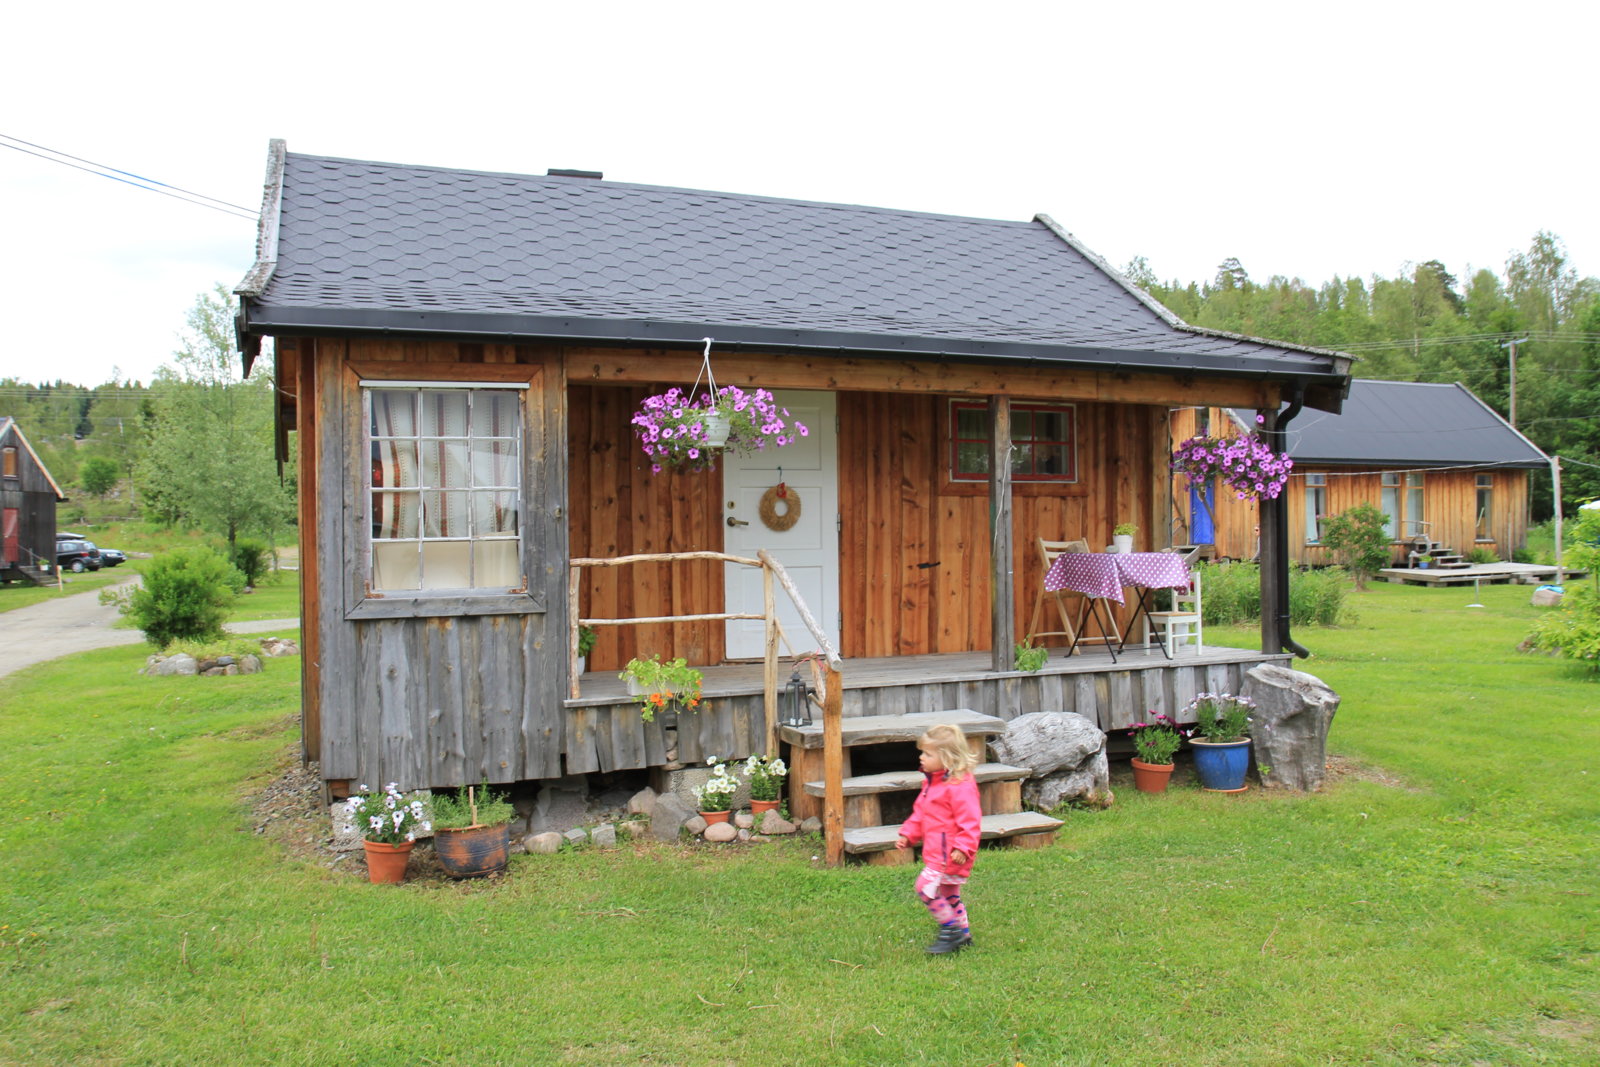 Hurdal_ecovillage_june_2015_old_village_2_Beautiful_wooden_house_and_little_girl.JPG